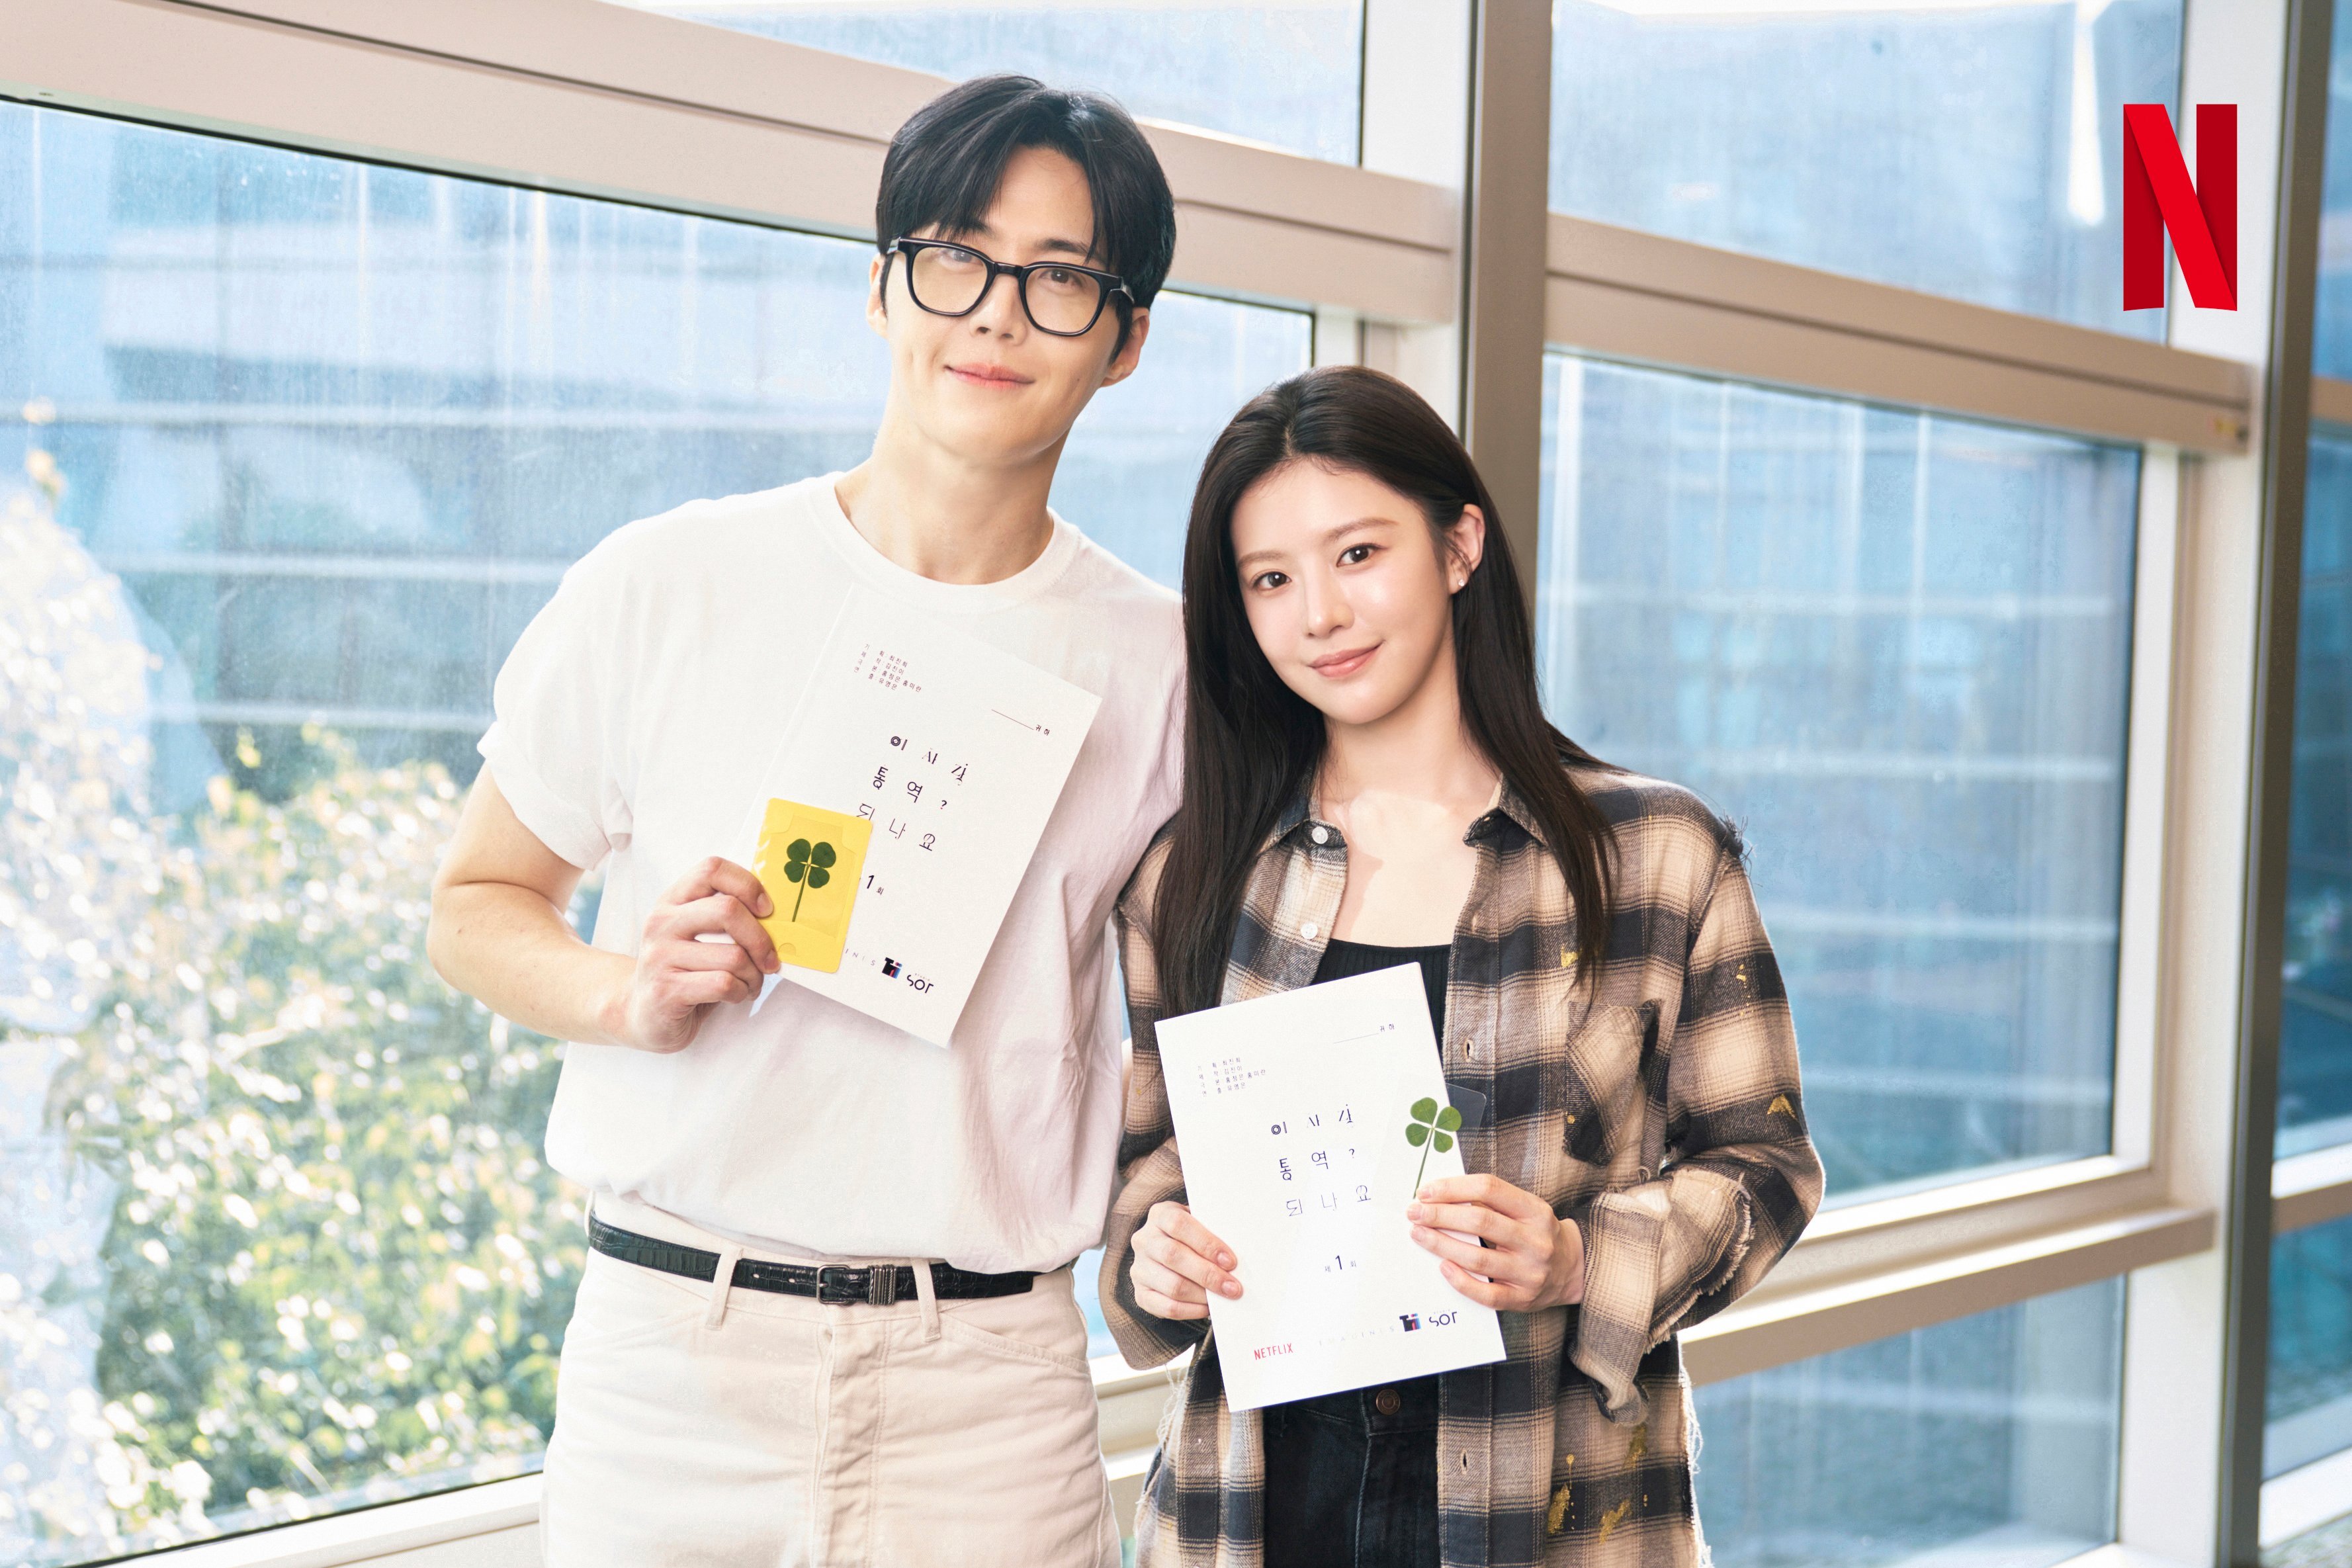 Kim Seon Ho, Go Youn Jung, And More Preview Chemistry At Script Reading For New Rom-Com Drama